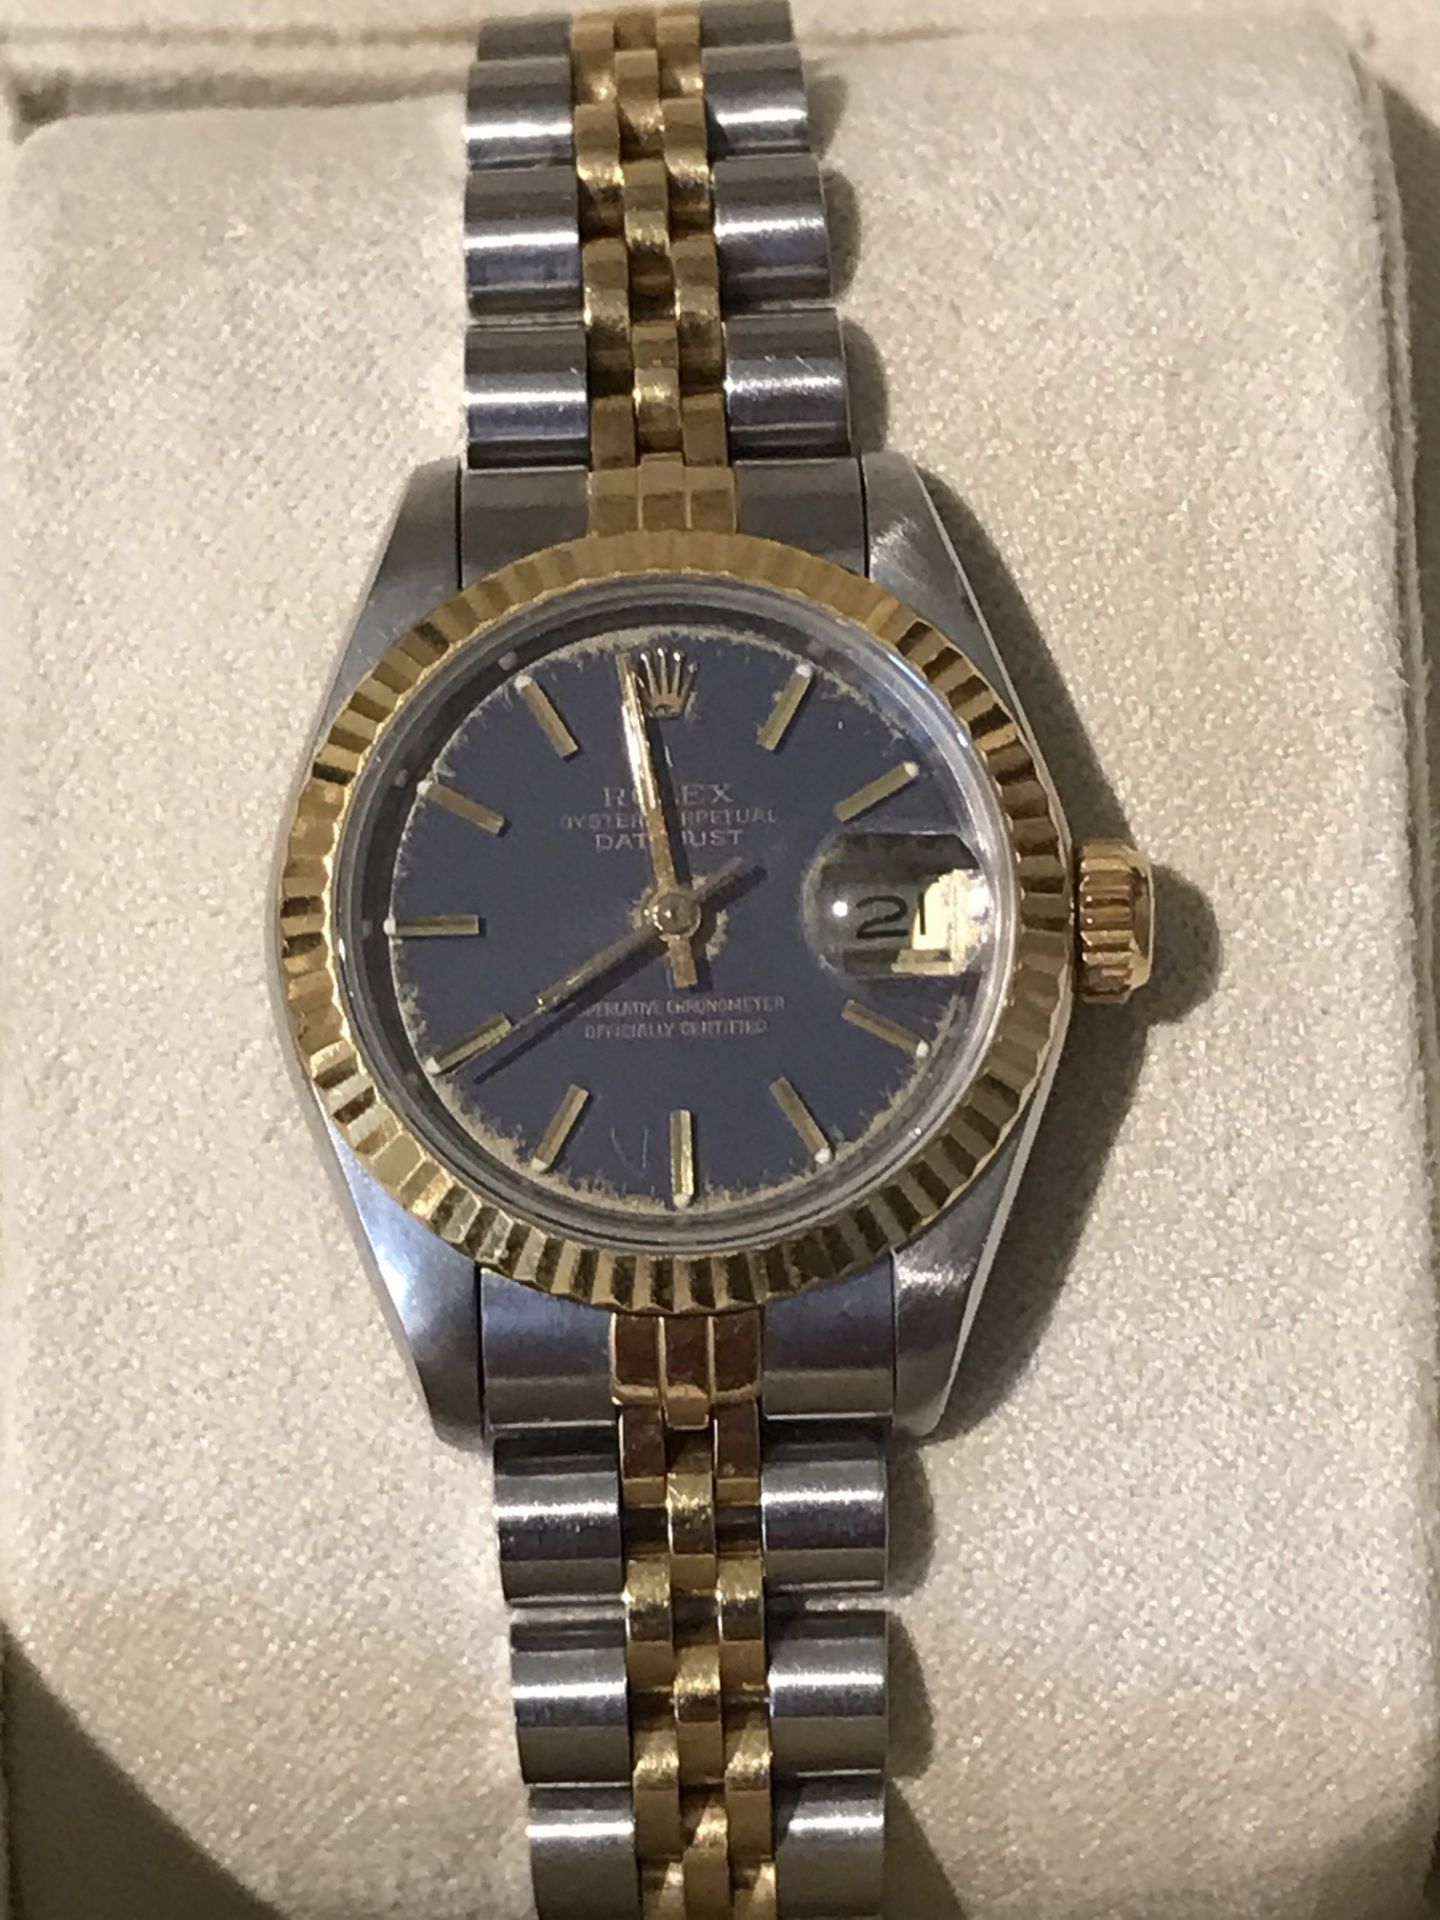 LADIES GOLD/SS ROLEX WATCH WITH BLUE DIAL - Image 2 of 3